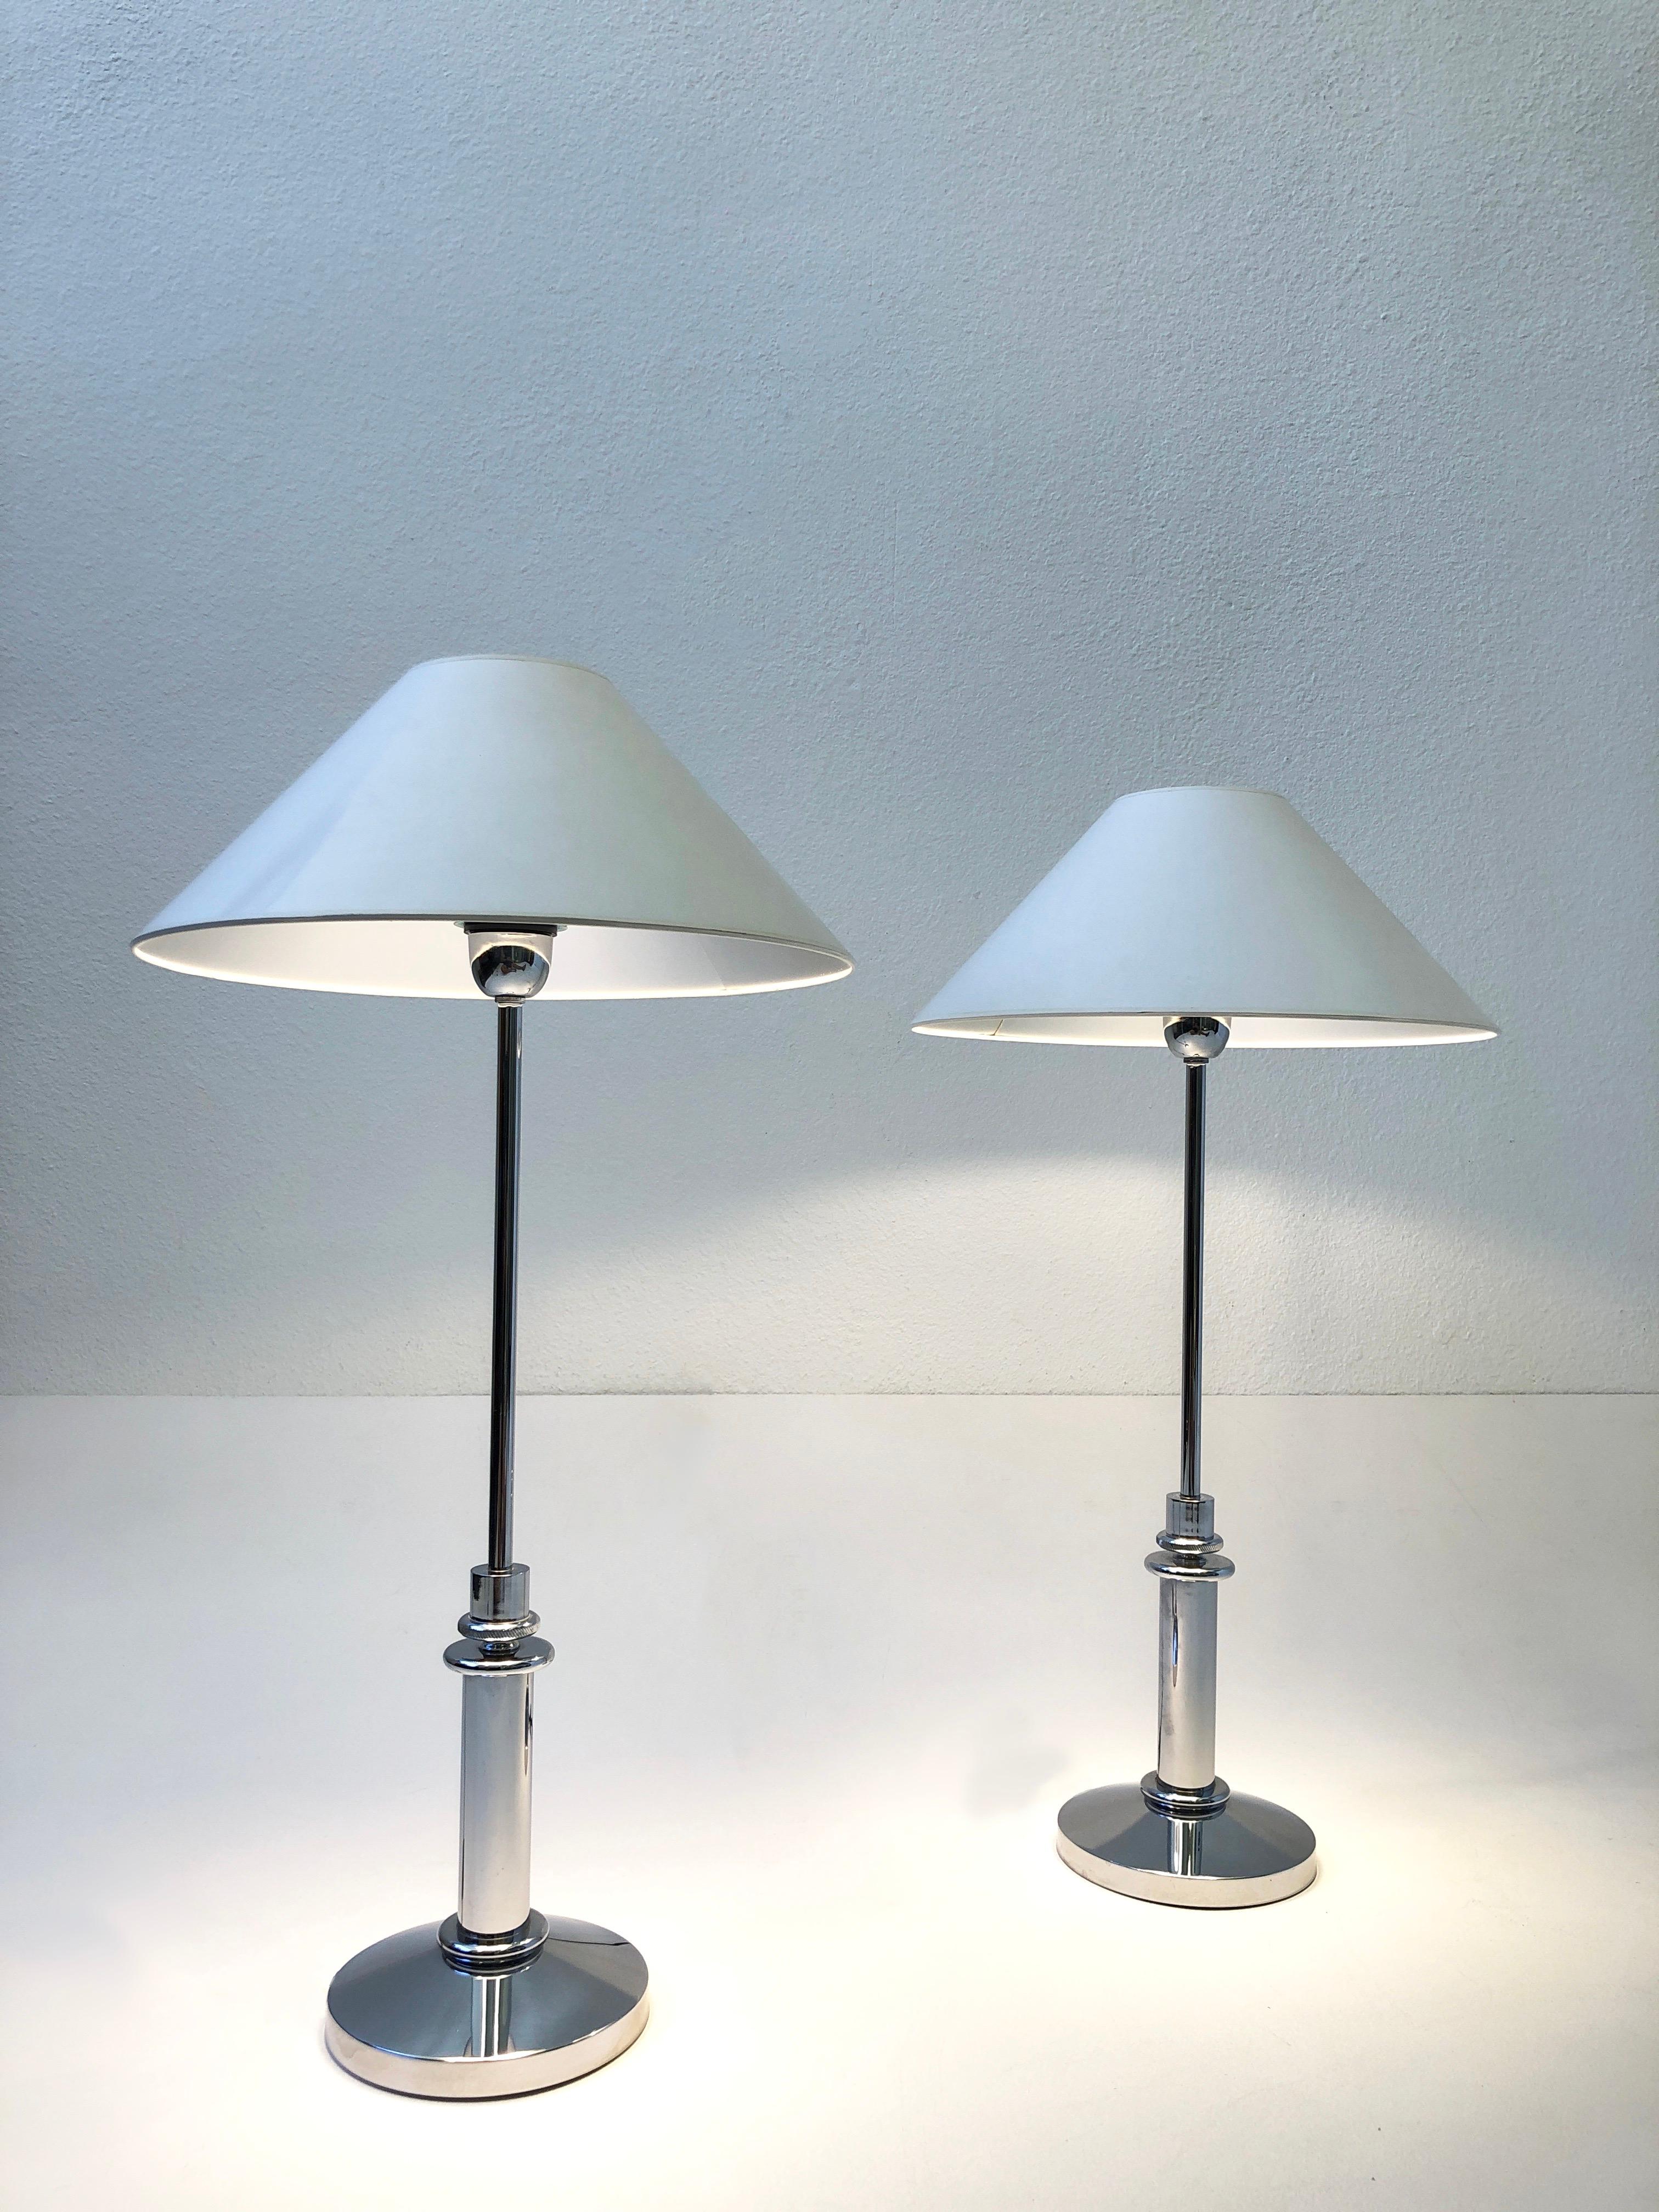 Late 20th Century Pair of Chrome and White Table Lamps by Mirak